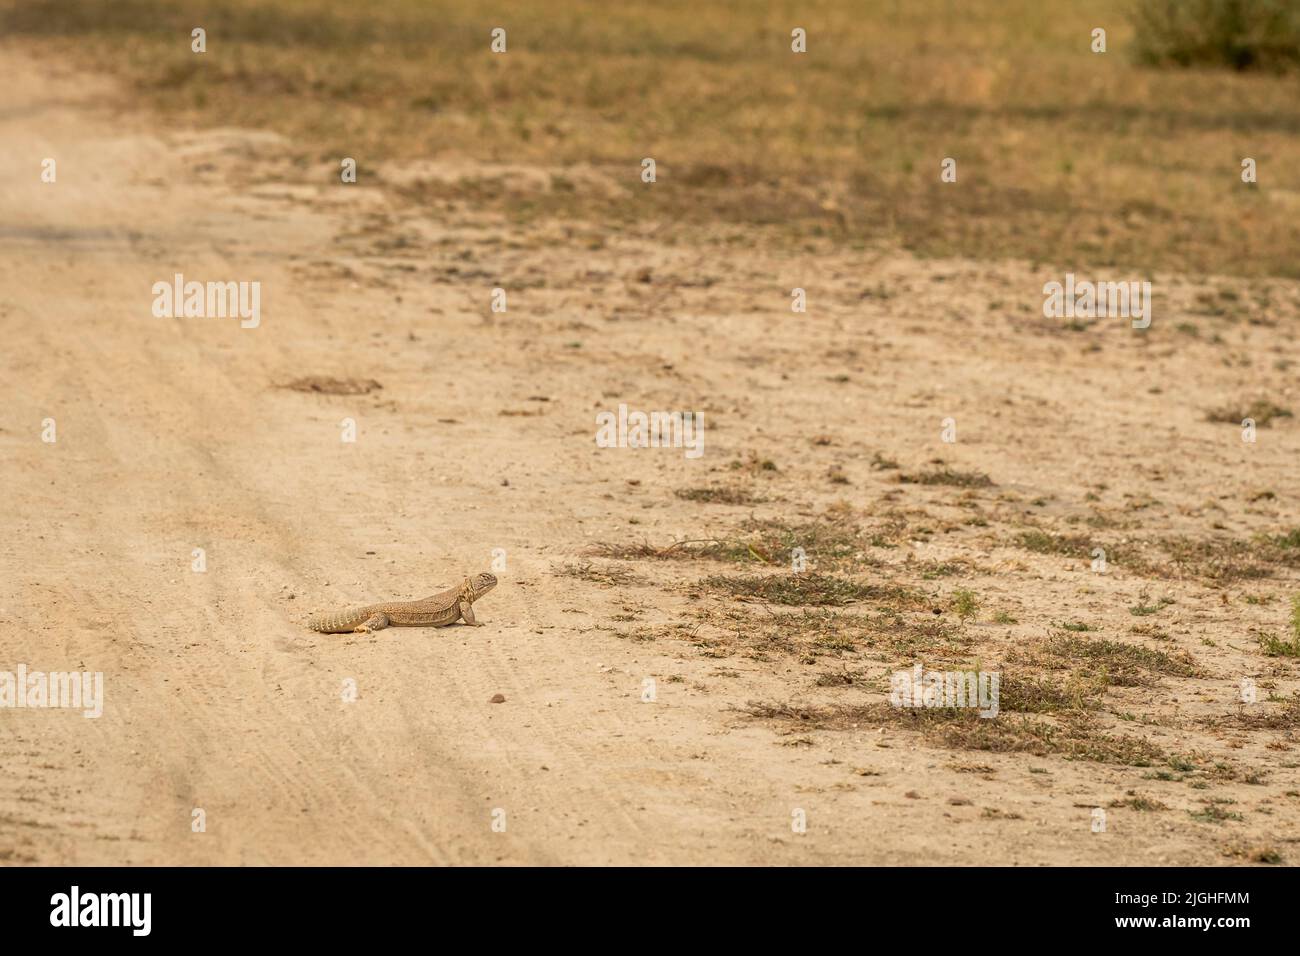 Spiny tailed lizards or Uromastyx in habitat at tal chhapar sanctuary rajasthan india asia Stock Photo